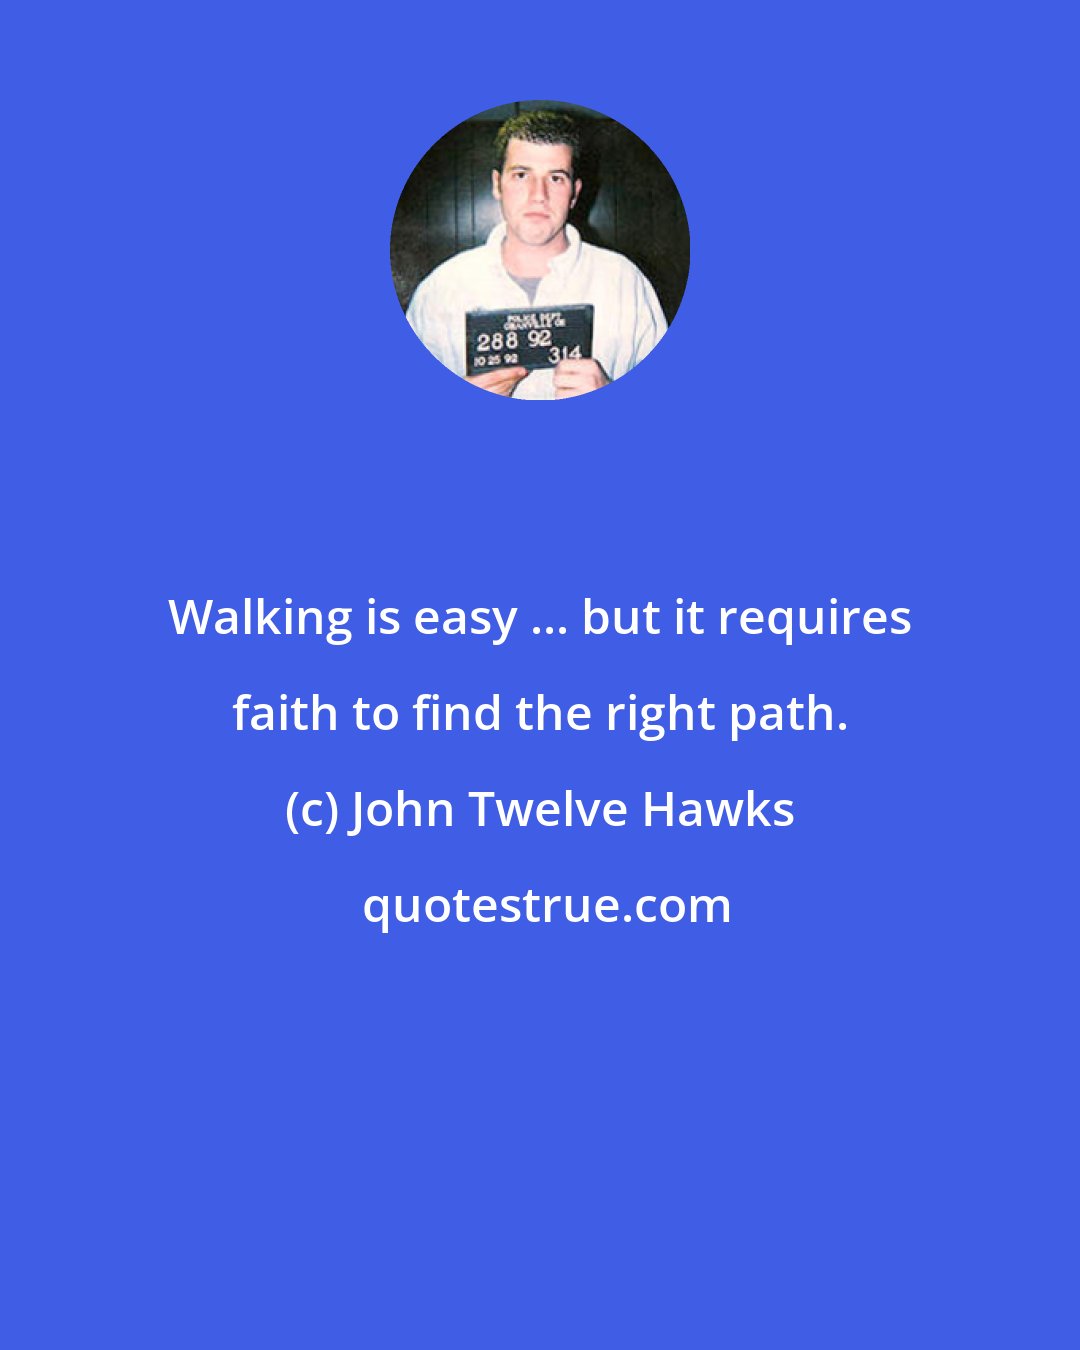 John Twelve Hawks: Walking is easy ... but it requires faith to find the right path.